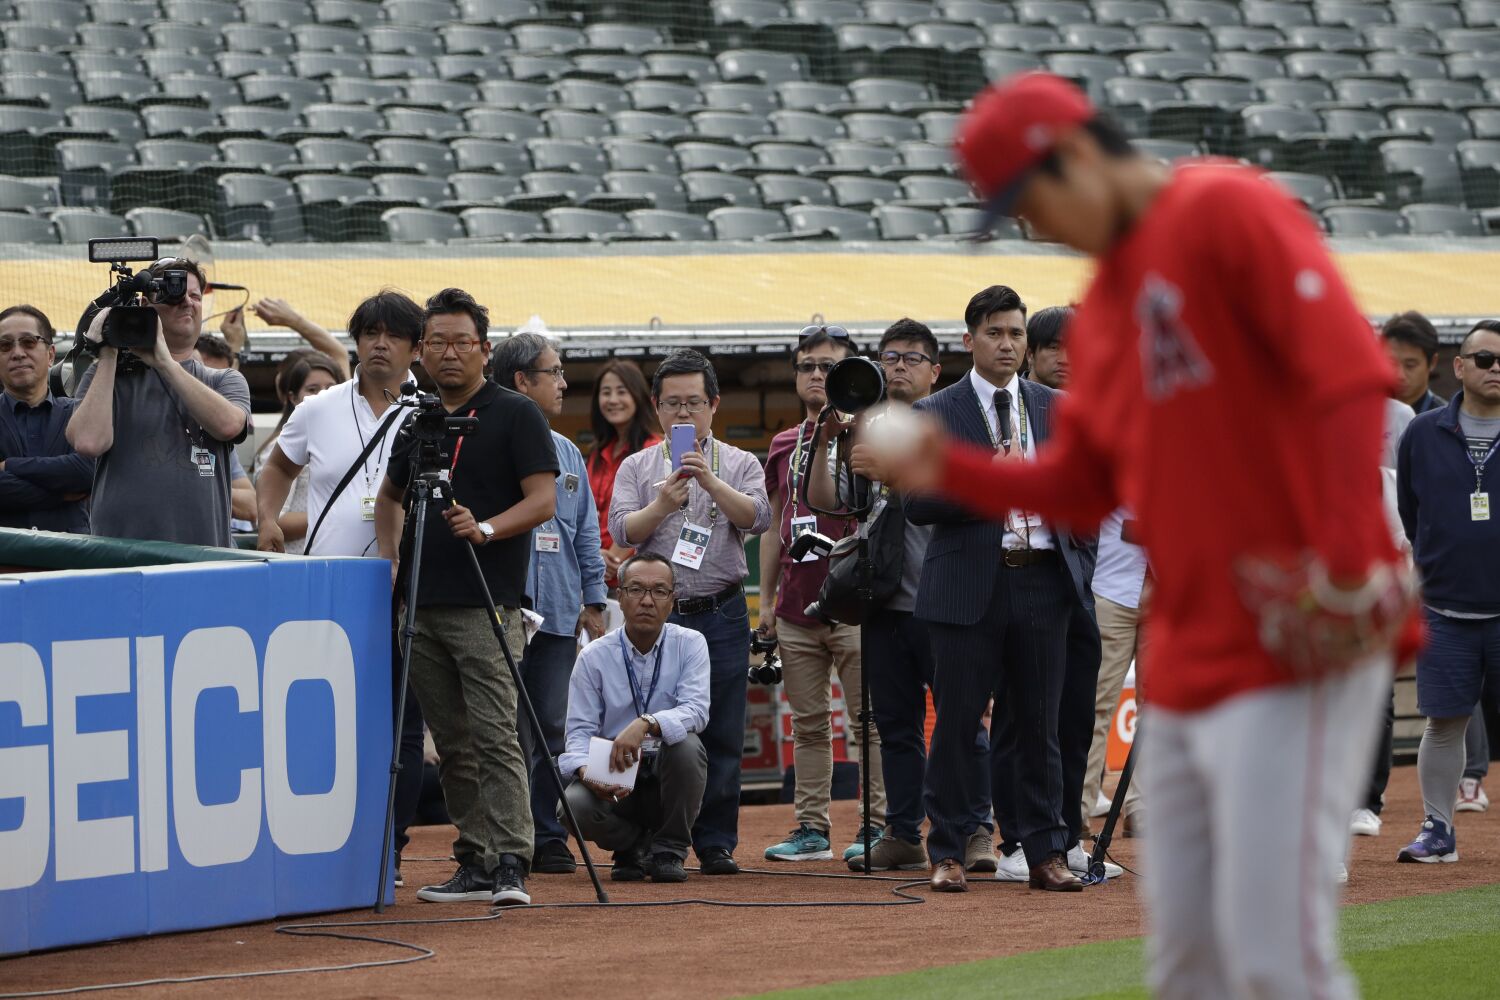 'He has changed my life completely.' What it's like covering Shohei Ohtani